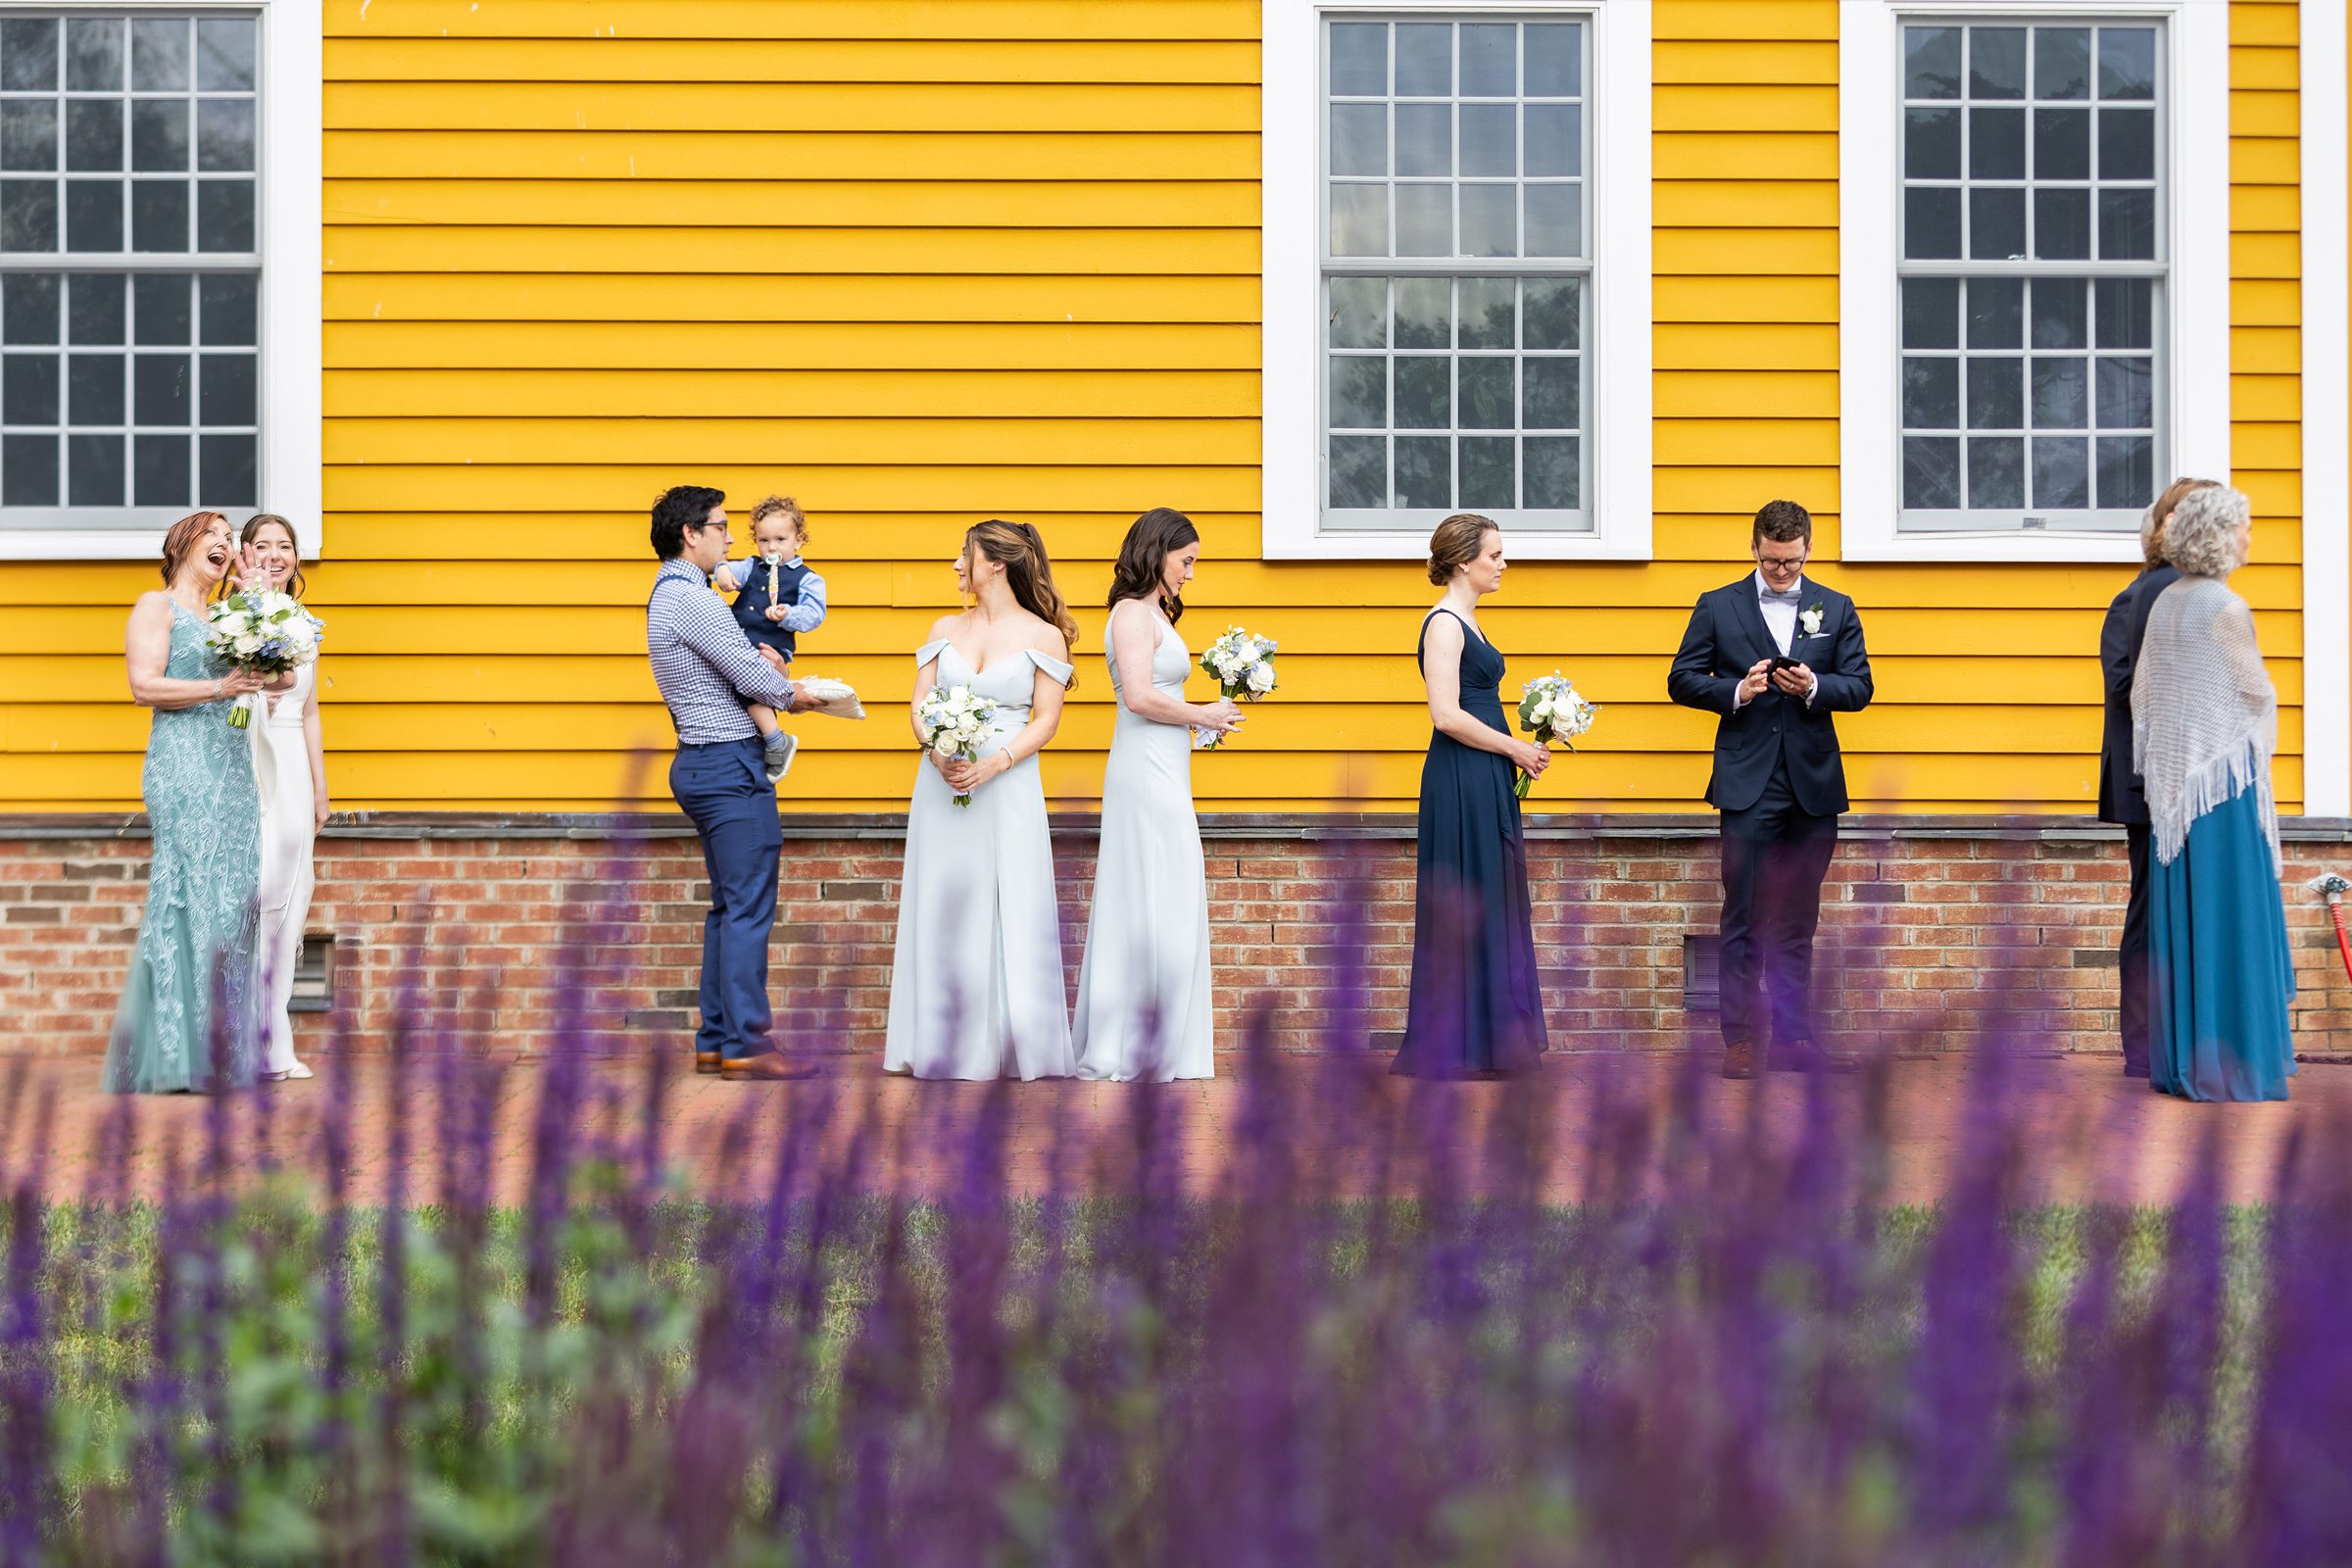 A group of people dressed formally, including bridesmaids and groomsmen, stand in front of a yellow building with white-framed windows, holding bouquets and engaging in various activities.